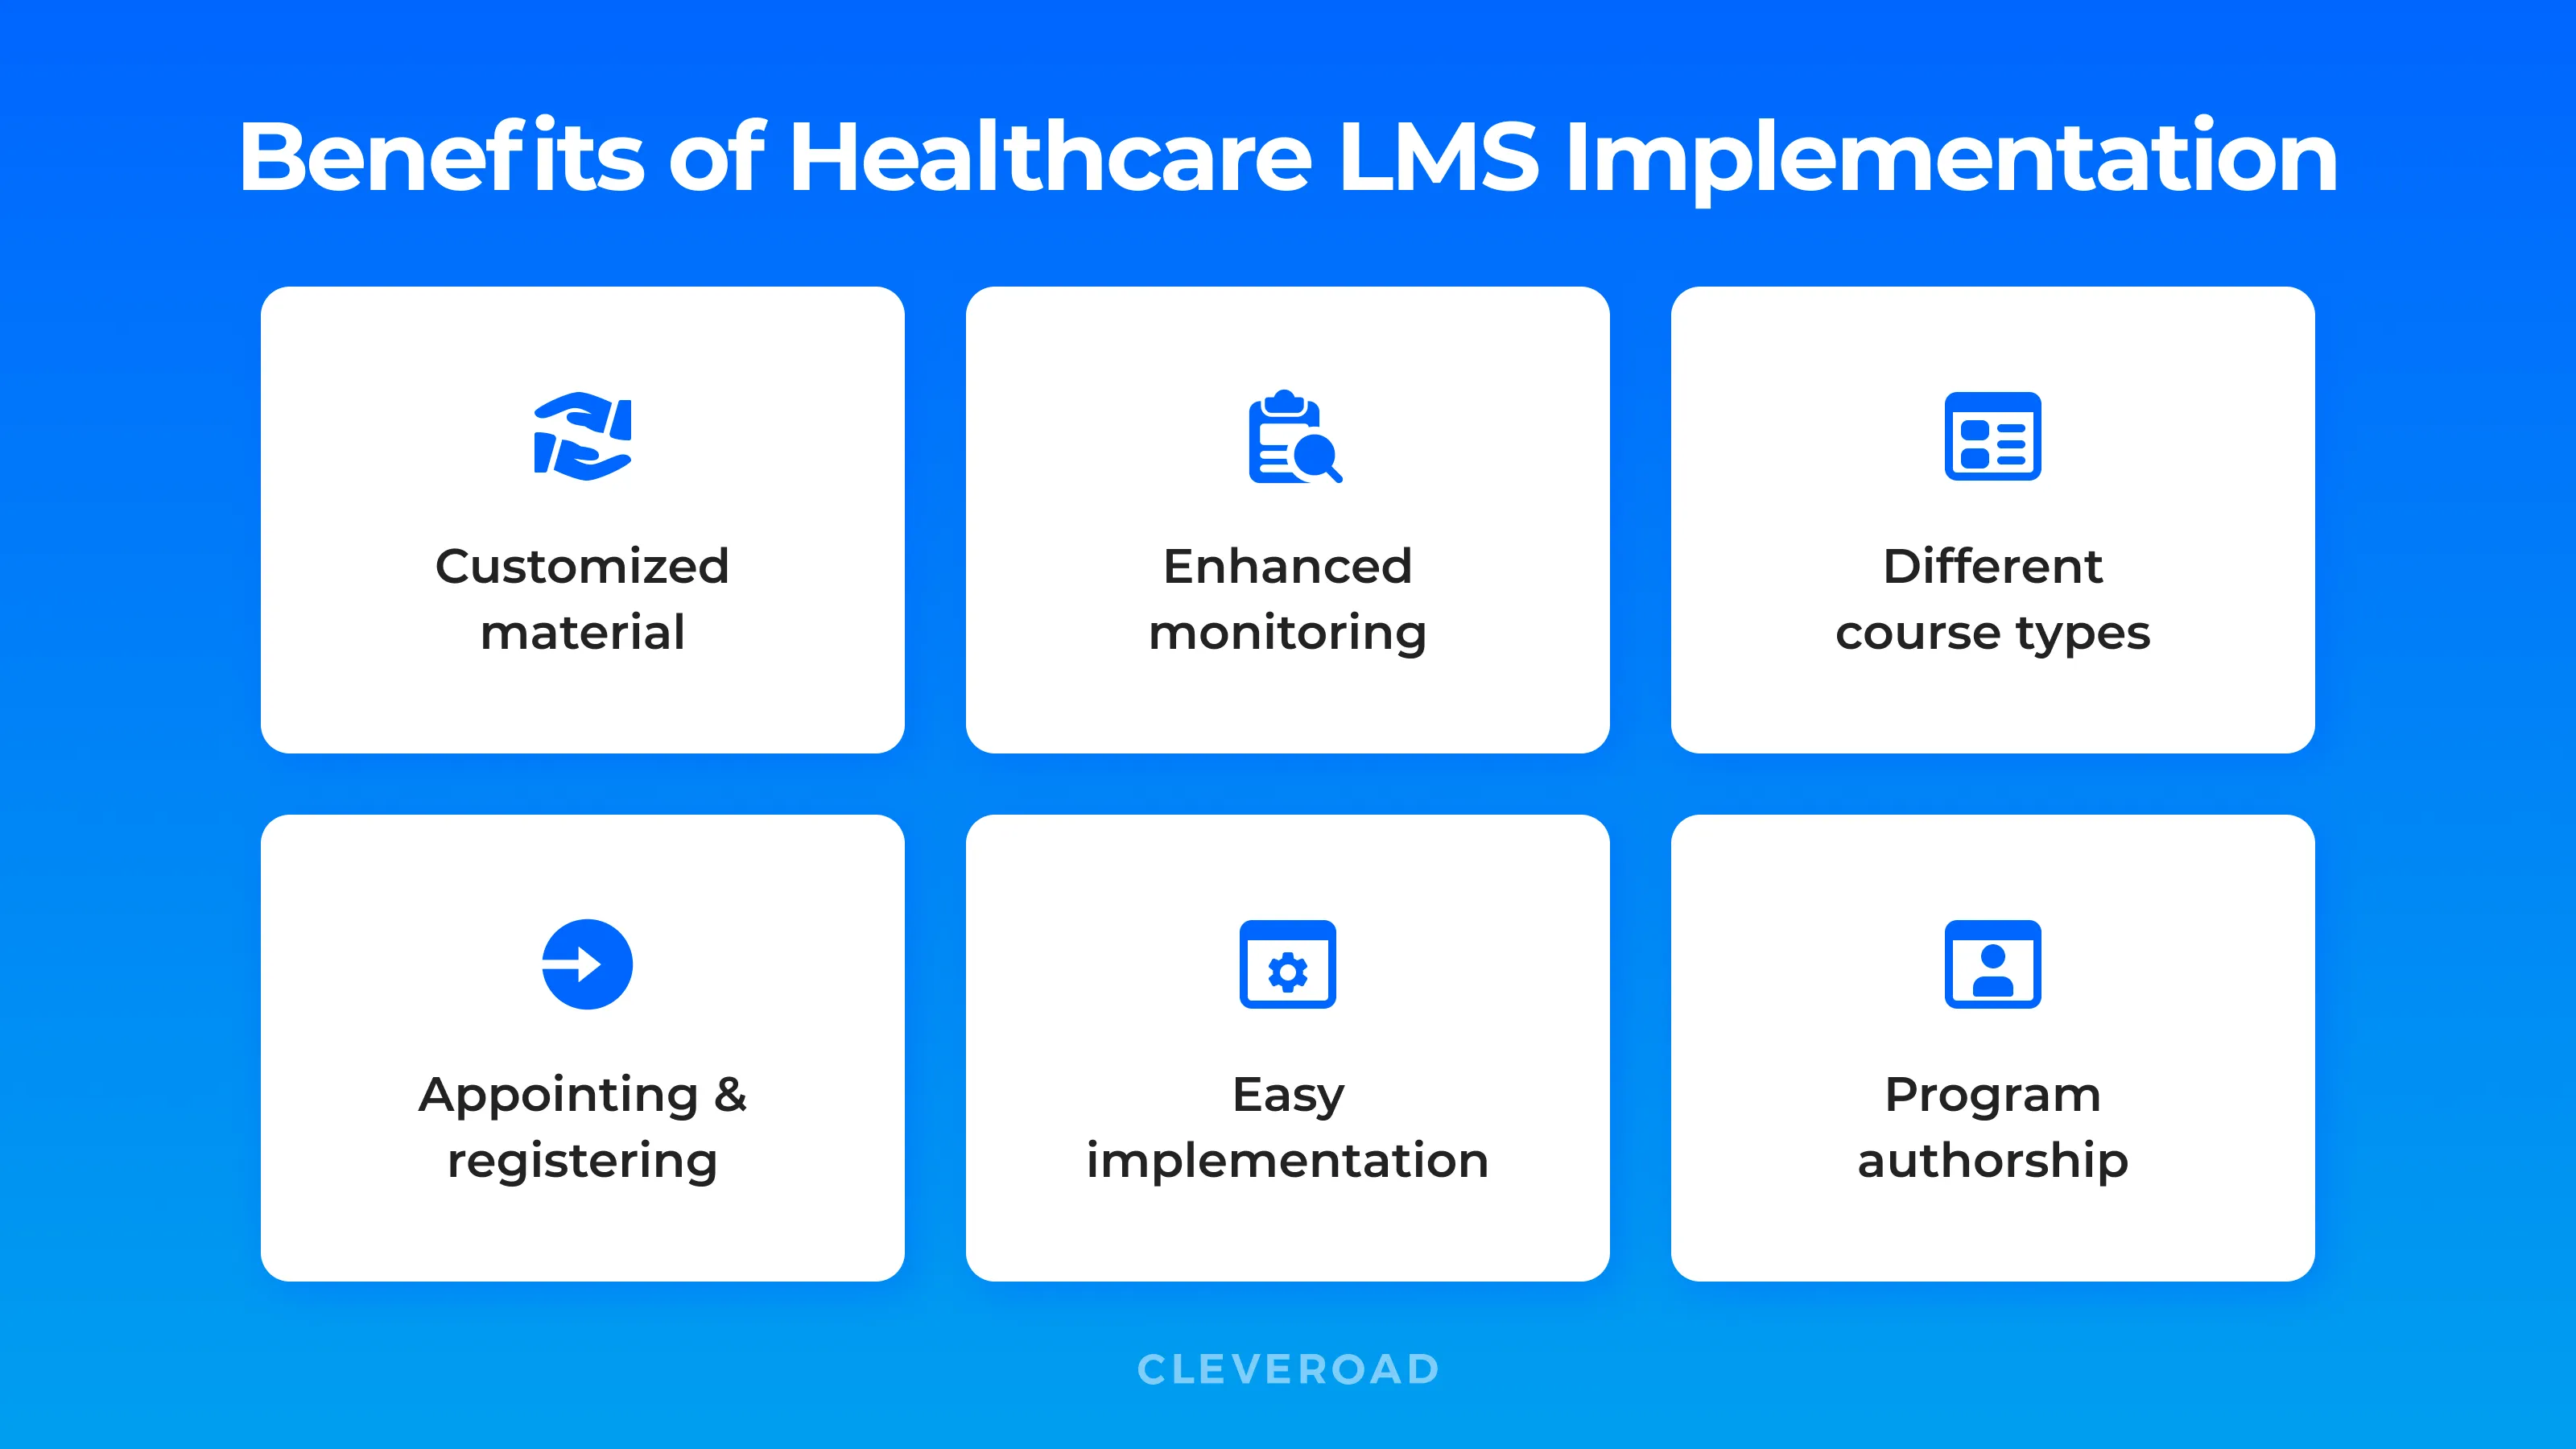 Benefits of a healthcare LMS implementation